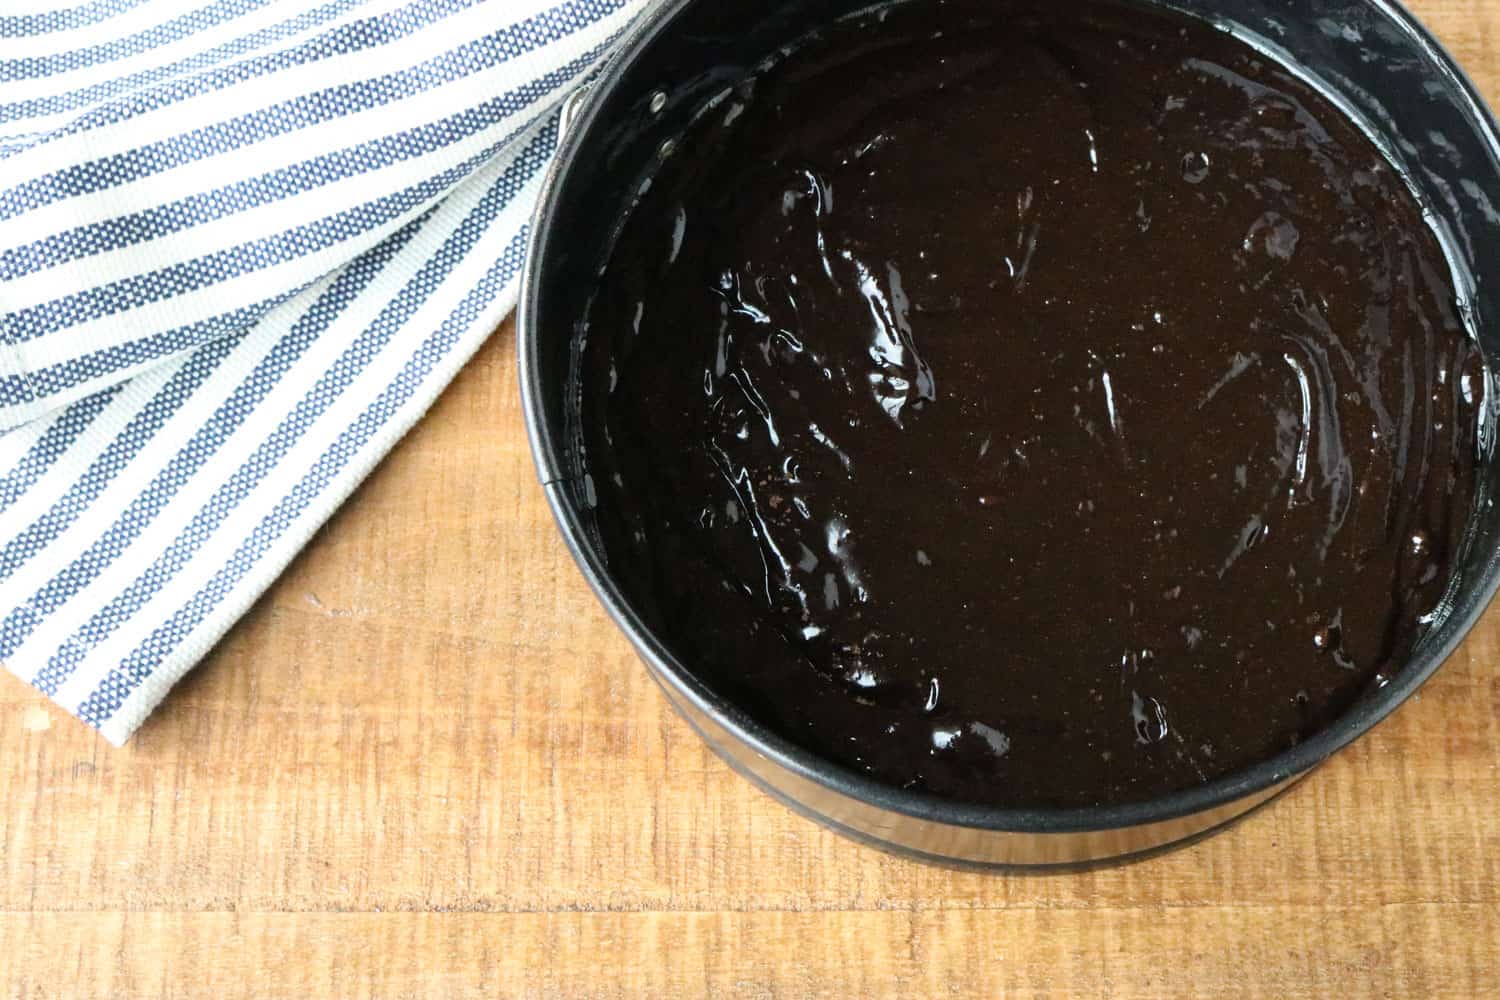 chocolate gluten free cake mixture in a pan on the counter next to a blue and white stripped kitchen towel